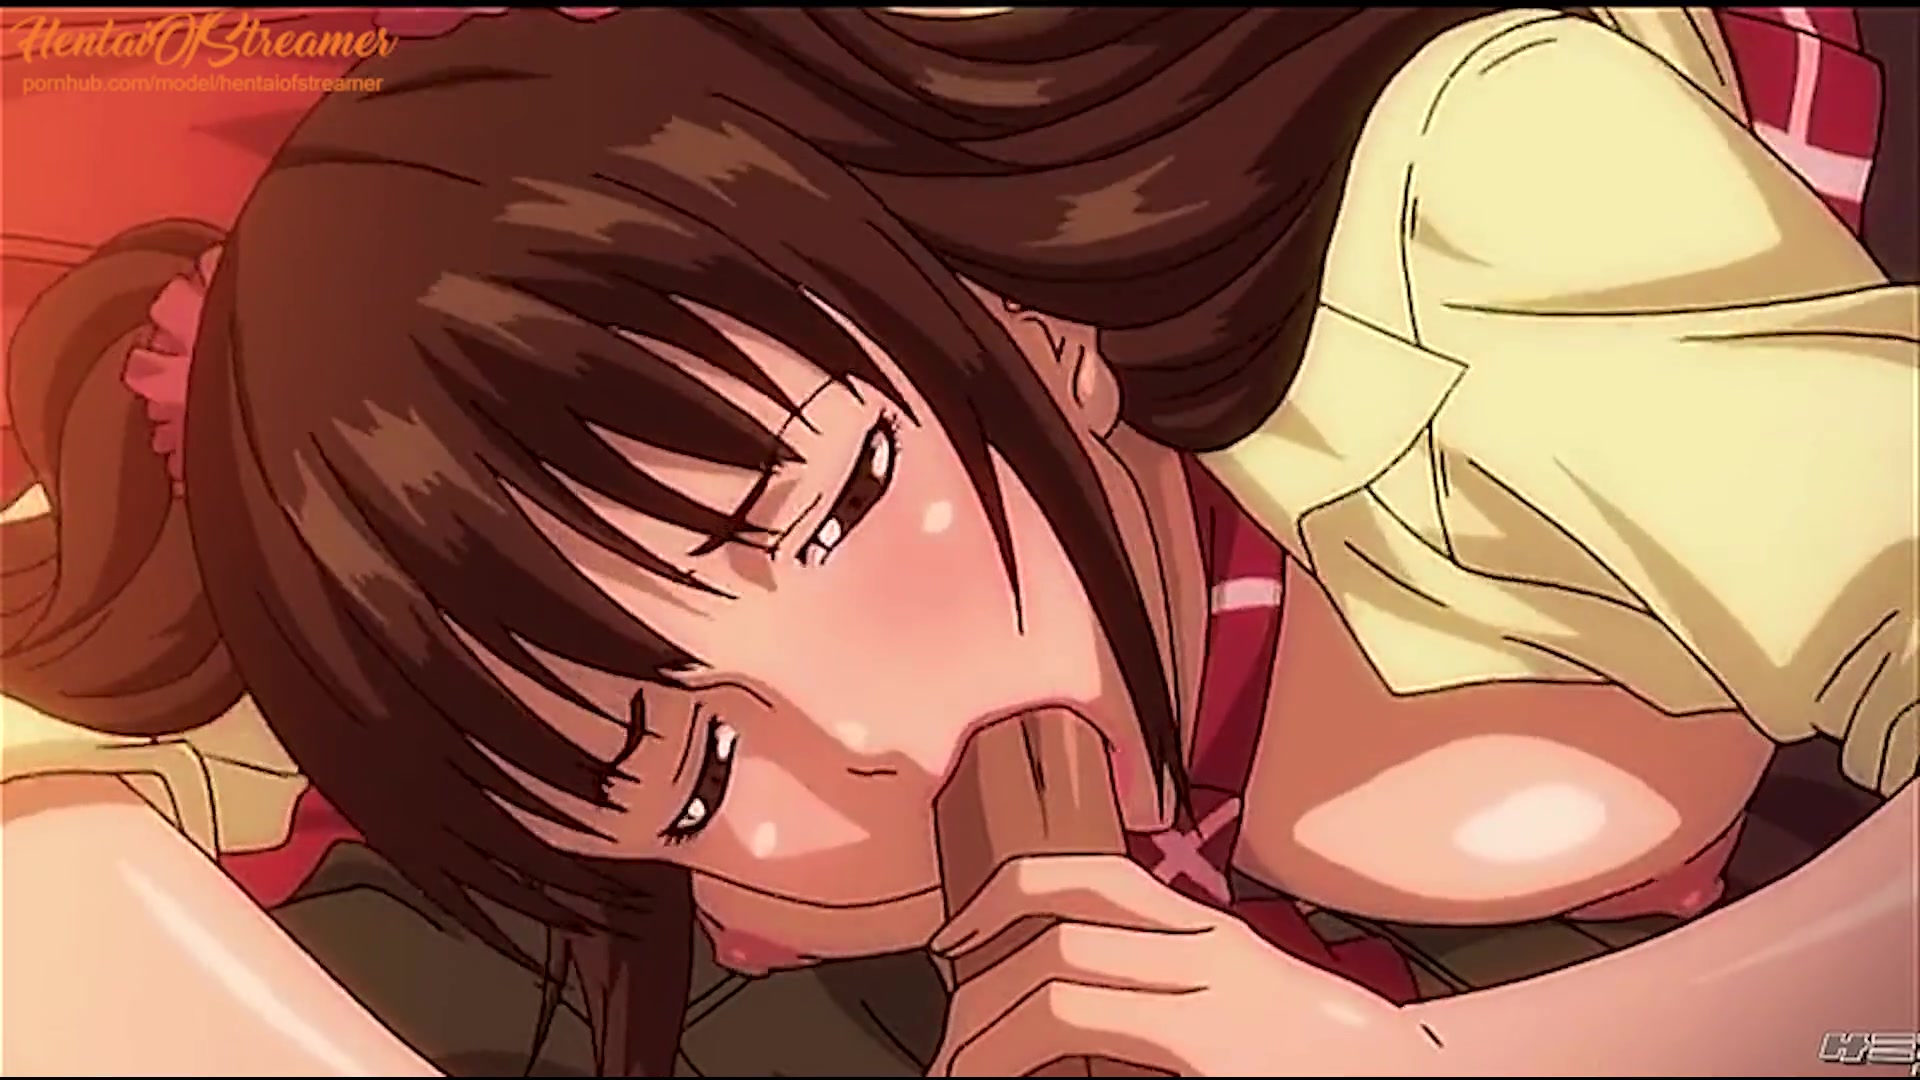 Hd Anime Porn - Anime Porn Uncensored | Hotwife Dude Sees his Gf Plumb and Deep-Throat off  another Stud | Anime Porn, Anime - uiPorn.com